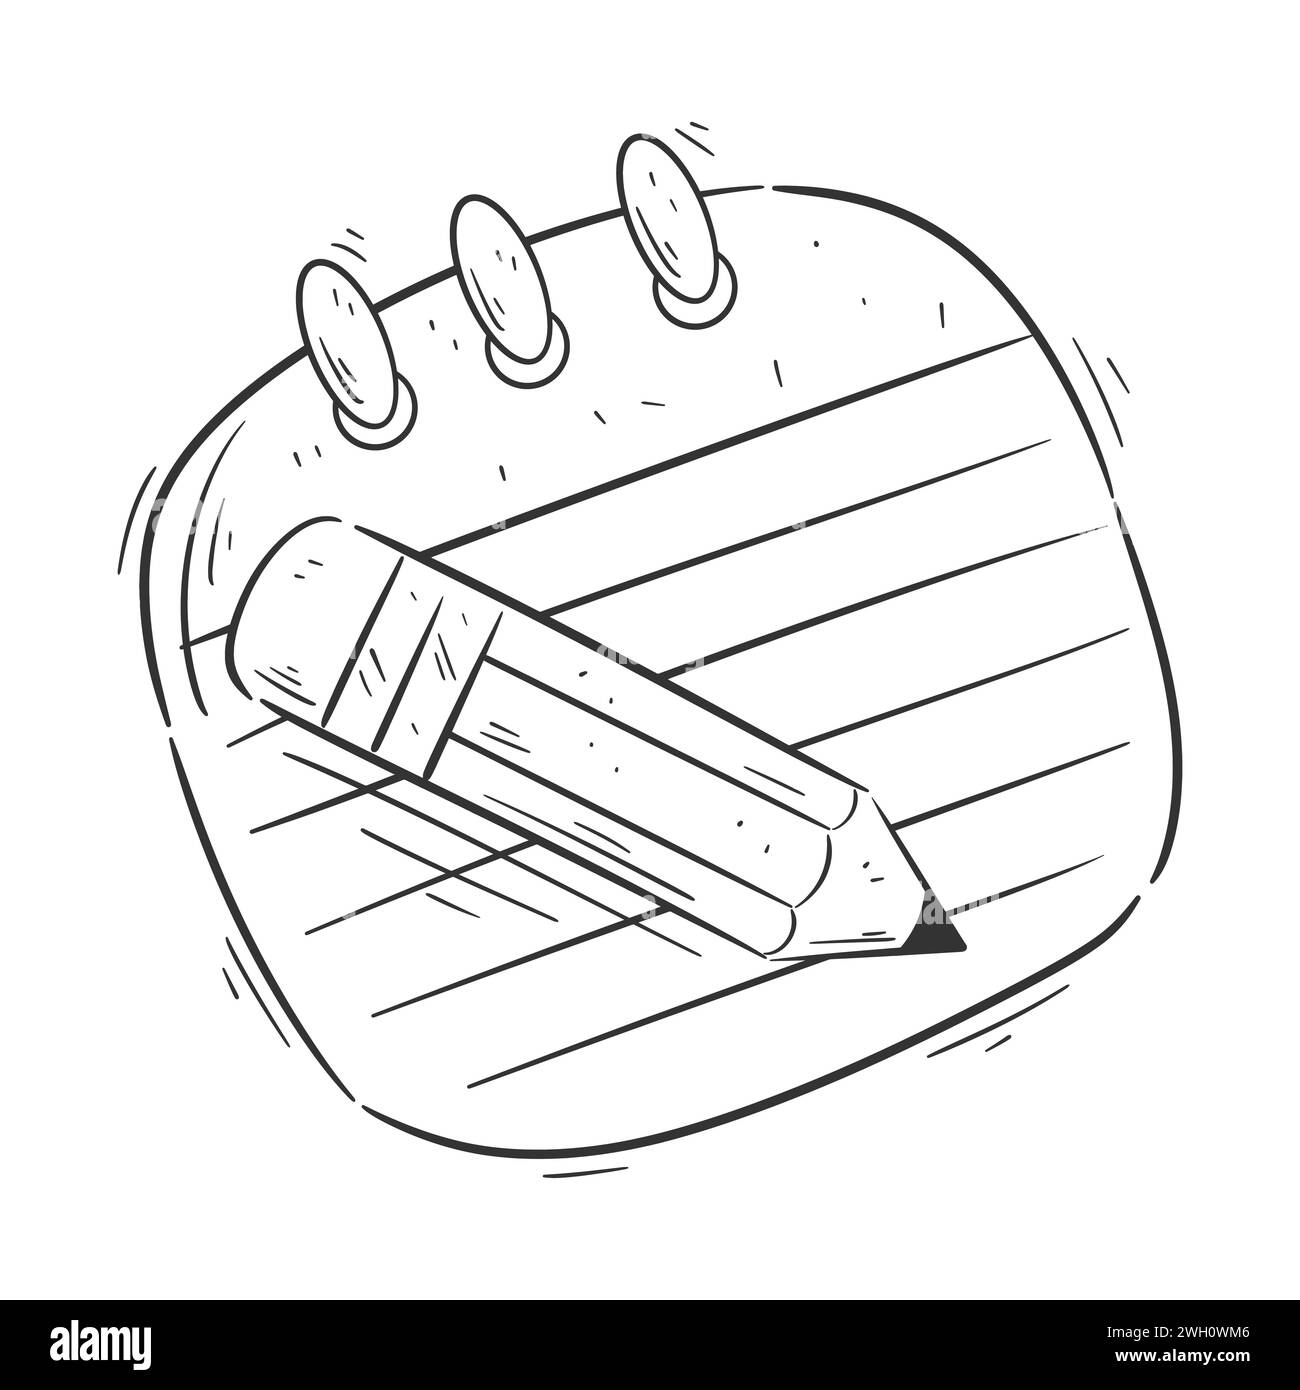 Writing paper and pencil in hand drawn style for coloring Stock Vector